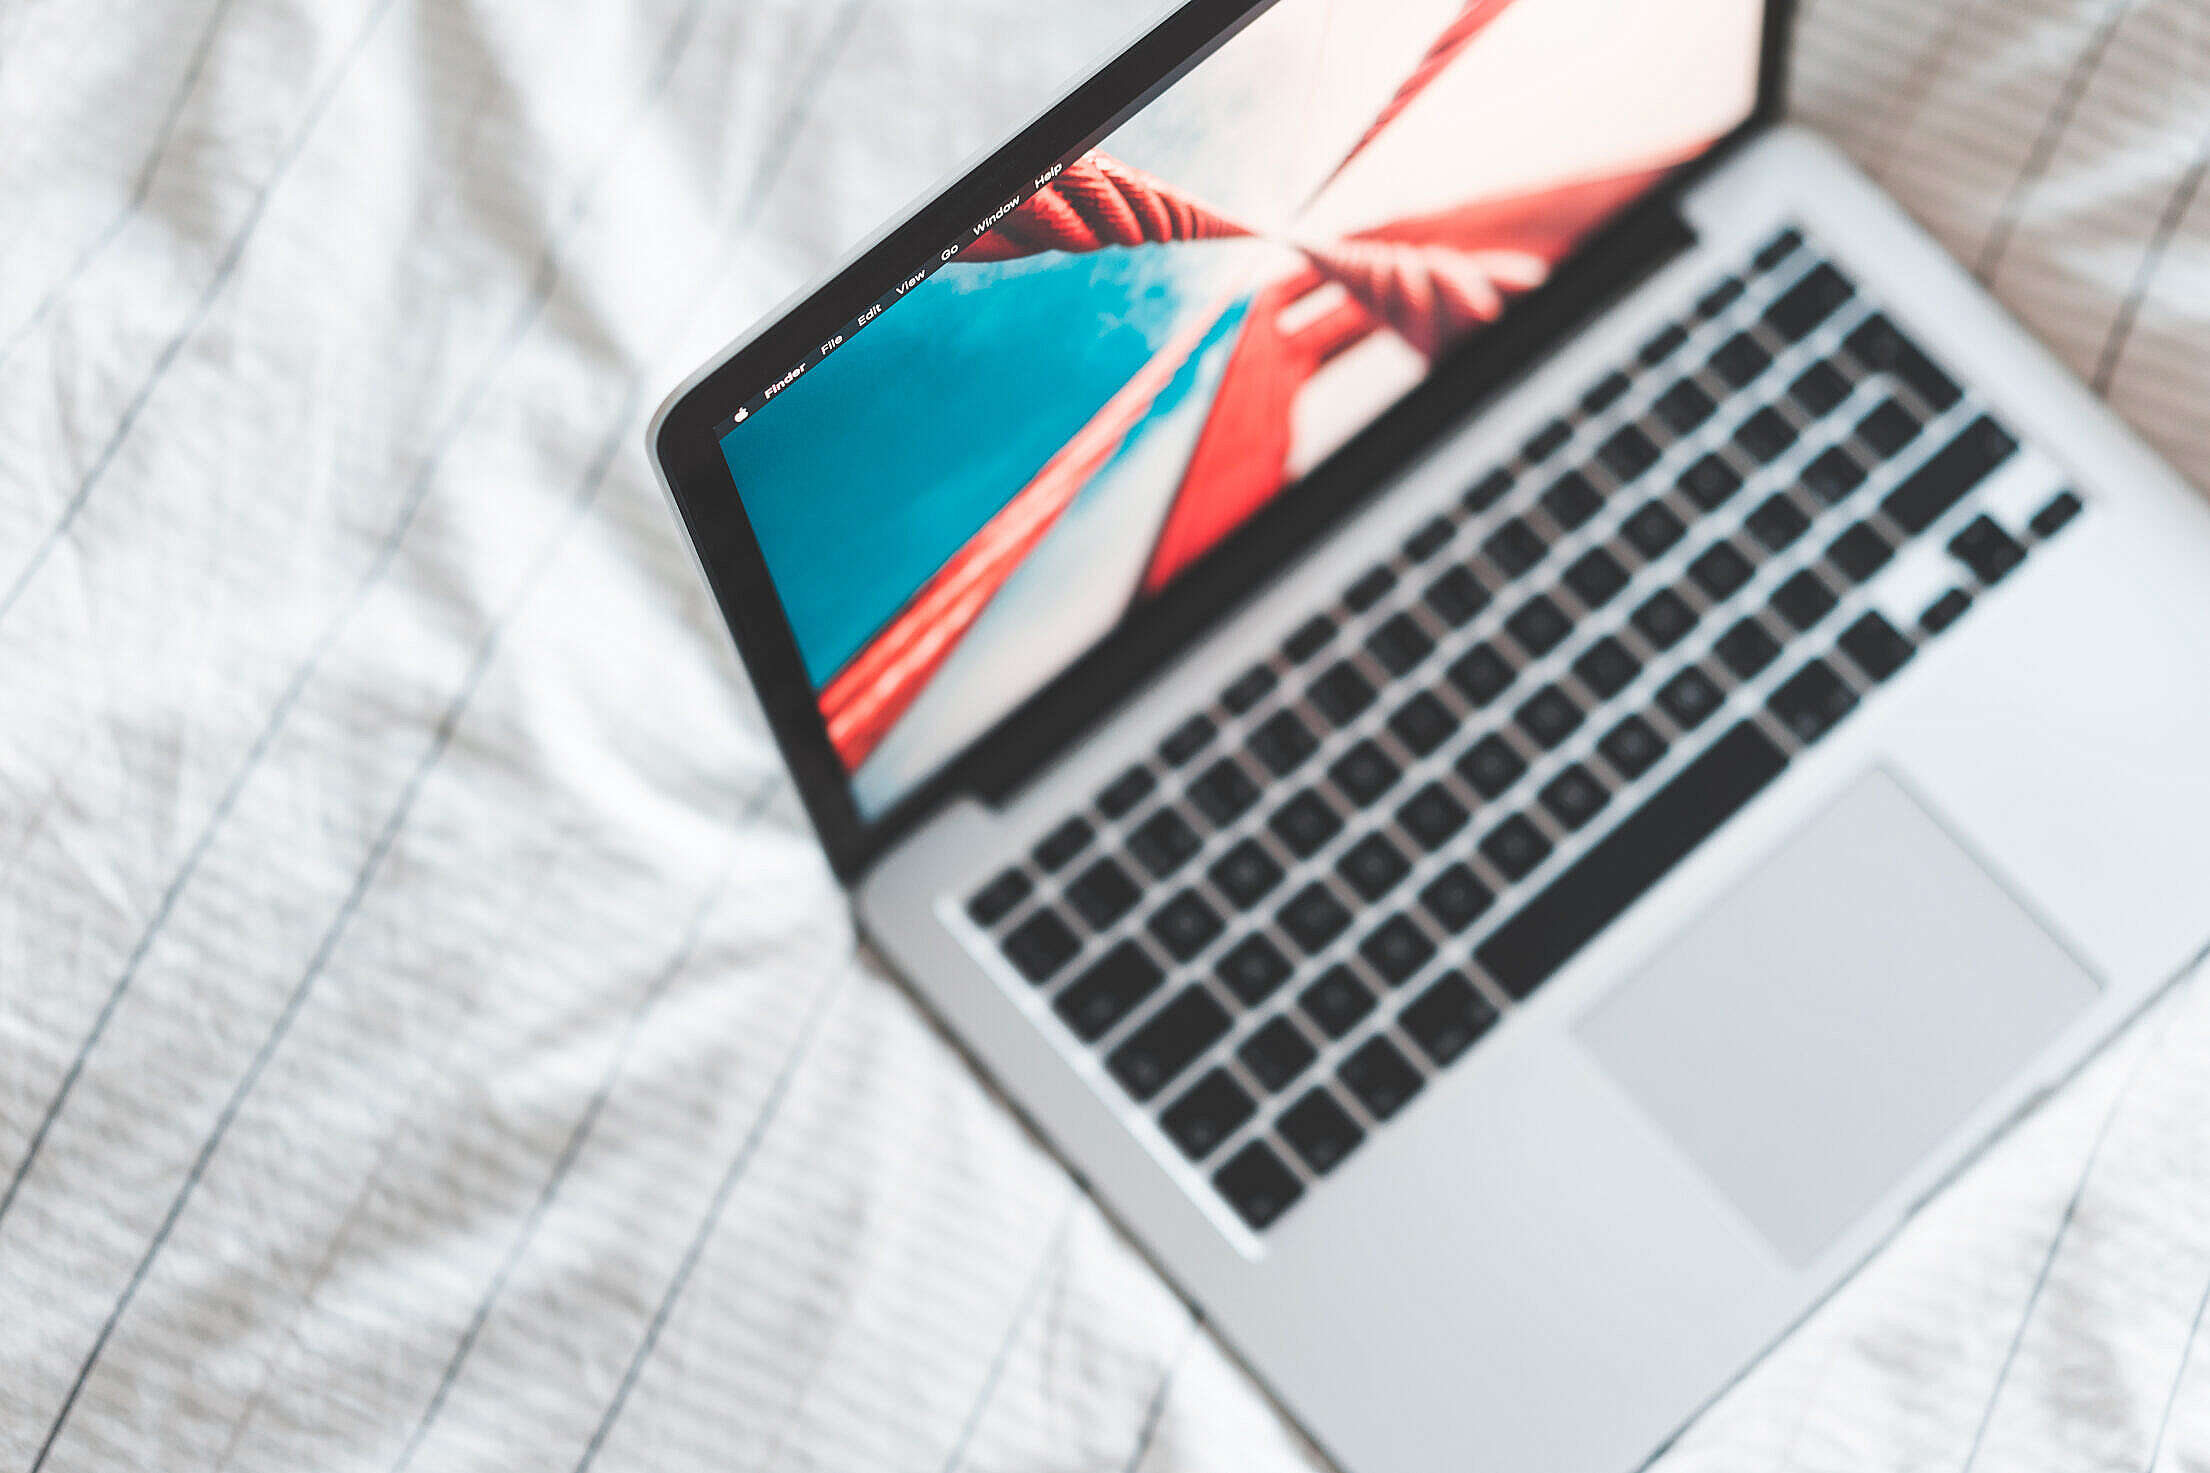 MacBook Laptop in Bed from Above Free Stock Photo